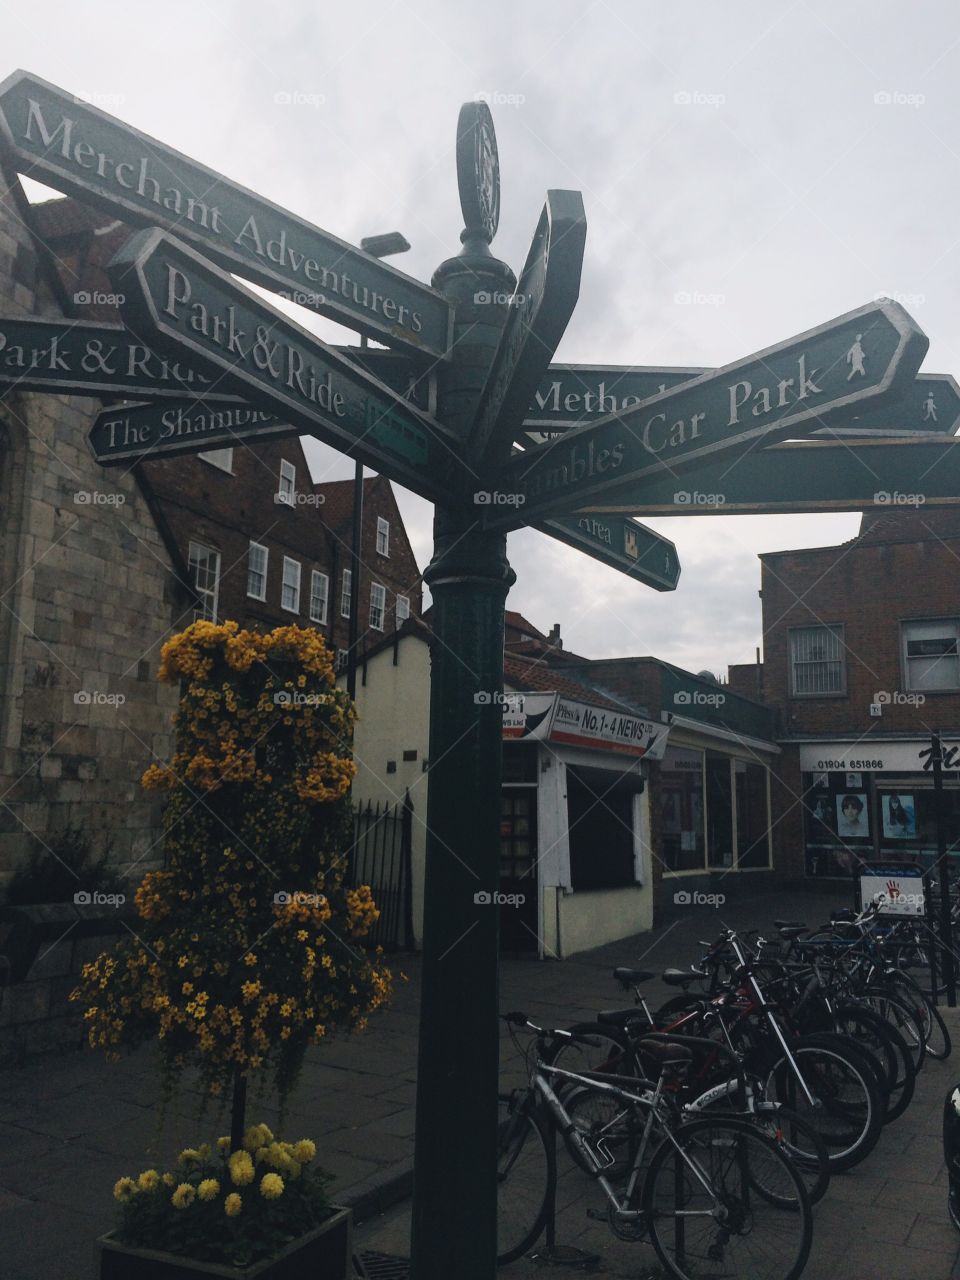 Streets sign in York, England.